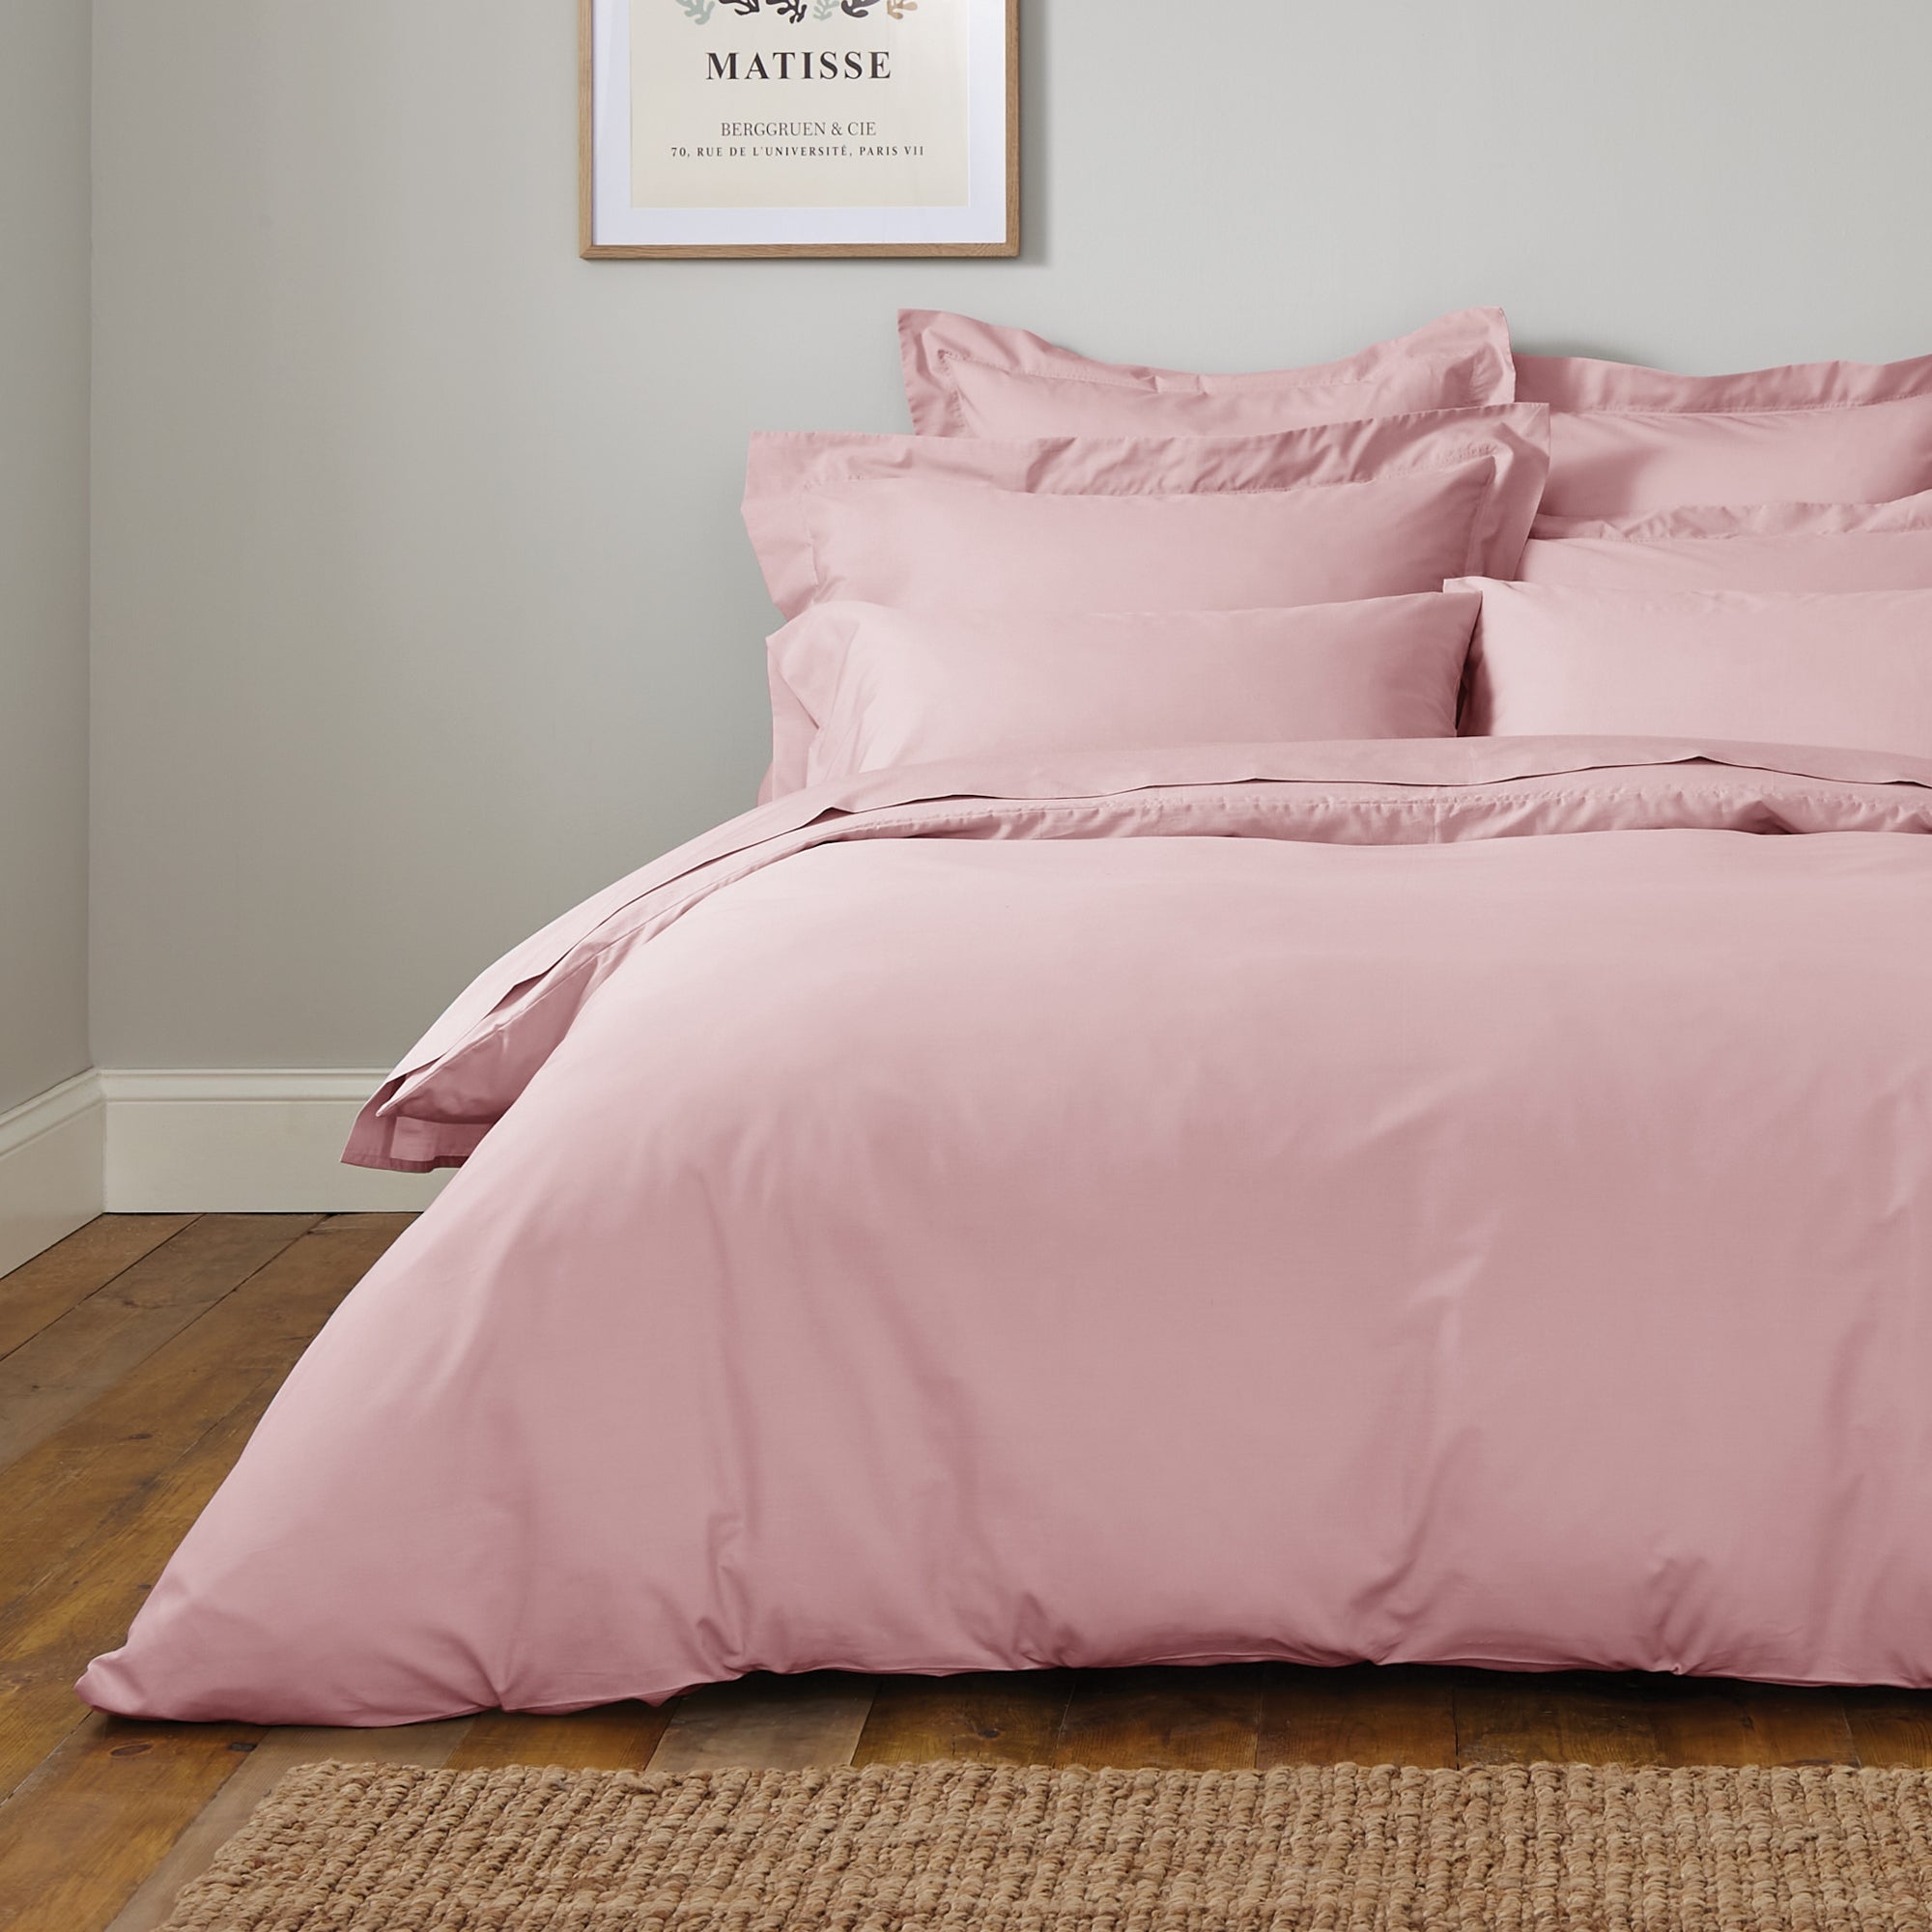 Image of Fogarty Cooling Cotton Blush Duvet Cover Pink